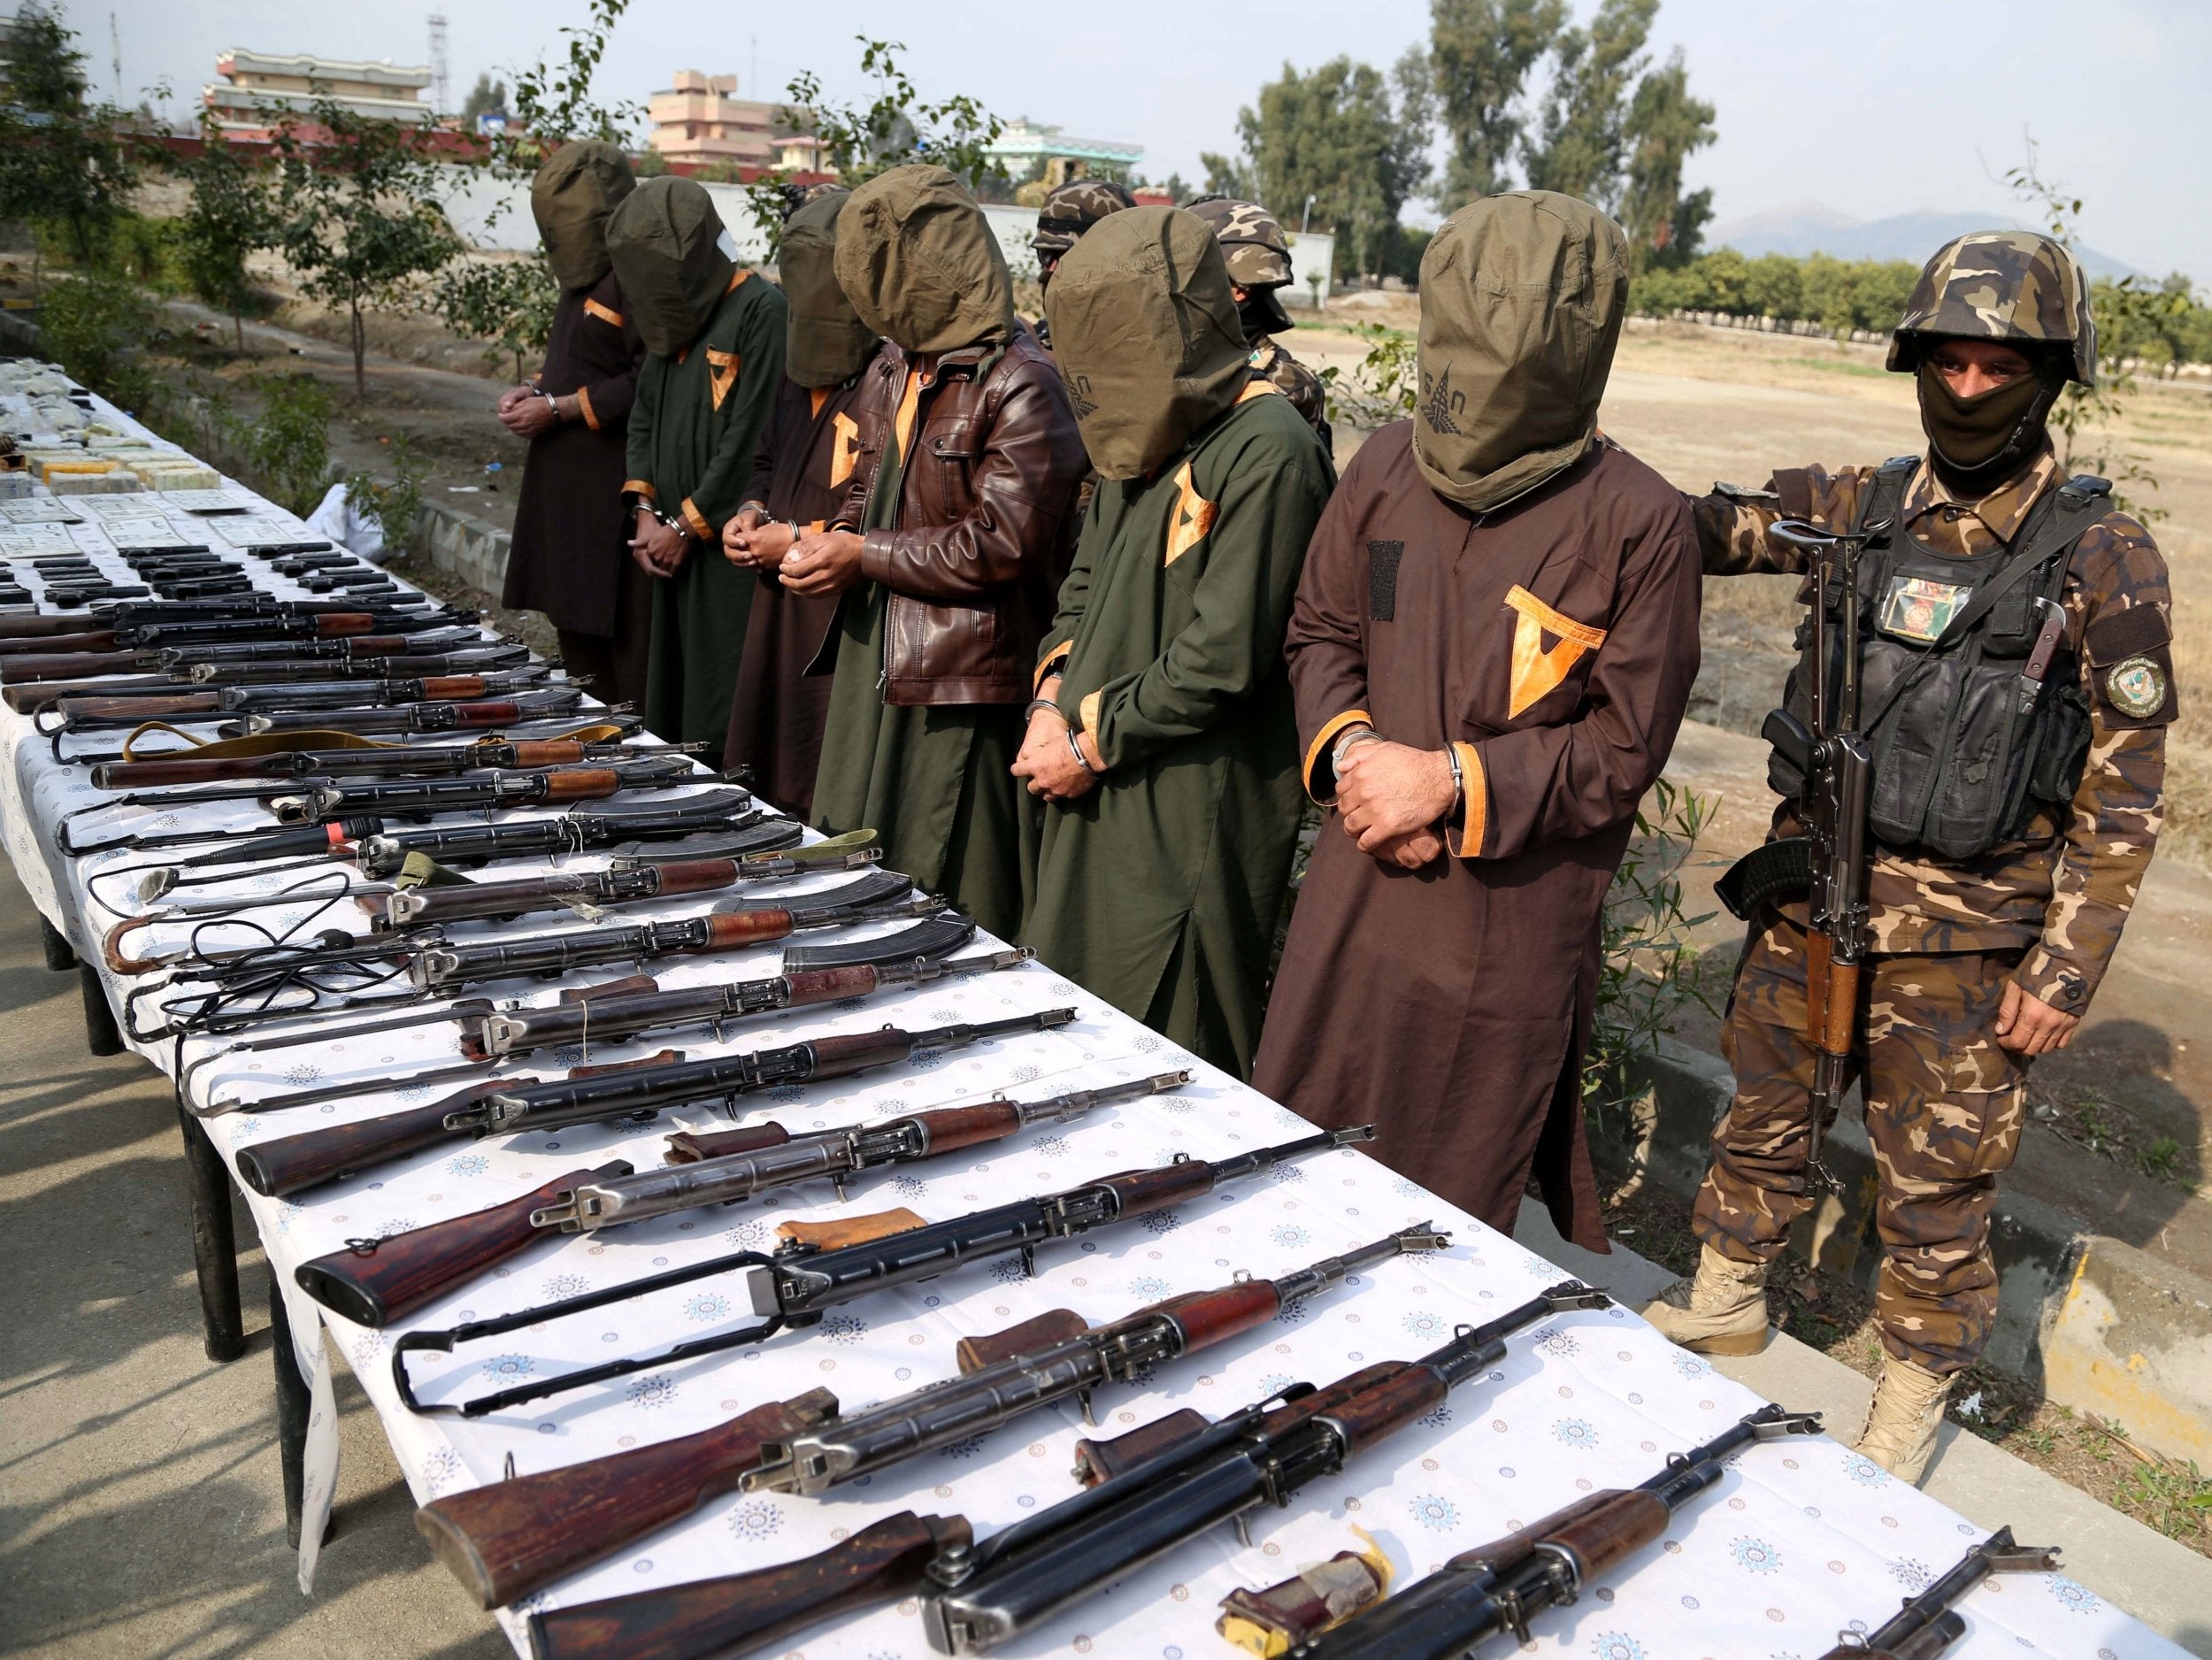 Militants accused of planning attacks on government and security forces line up after their arrest in Jalalabad, Afghanistan, on 23 January 2019. According to reports the six suspected militants, two of them Taliban and four of them from IS, were arrested when Afghan security forces carried out a number of operations targeting militants and criminals in different parts of the country